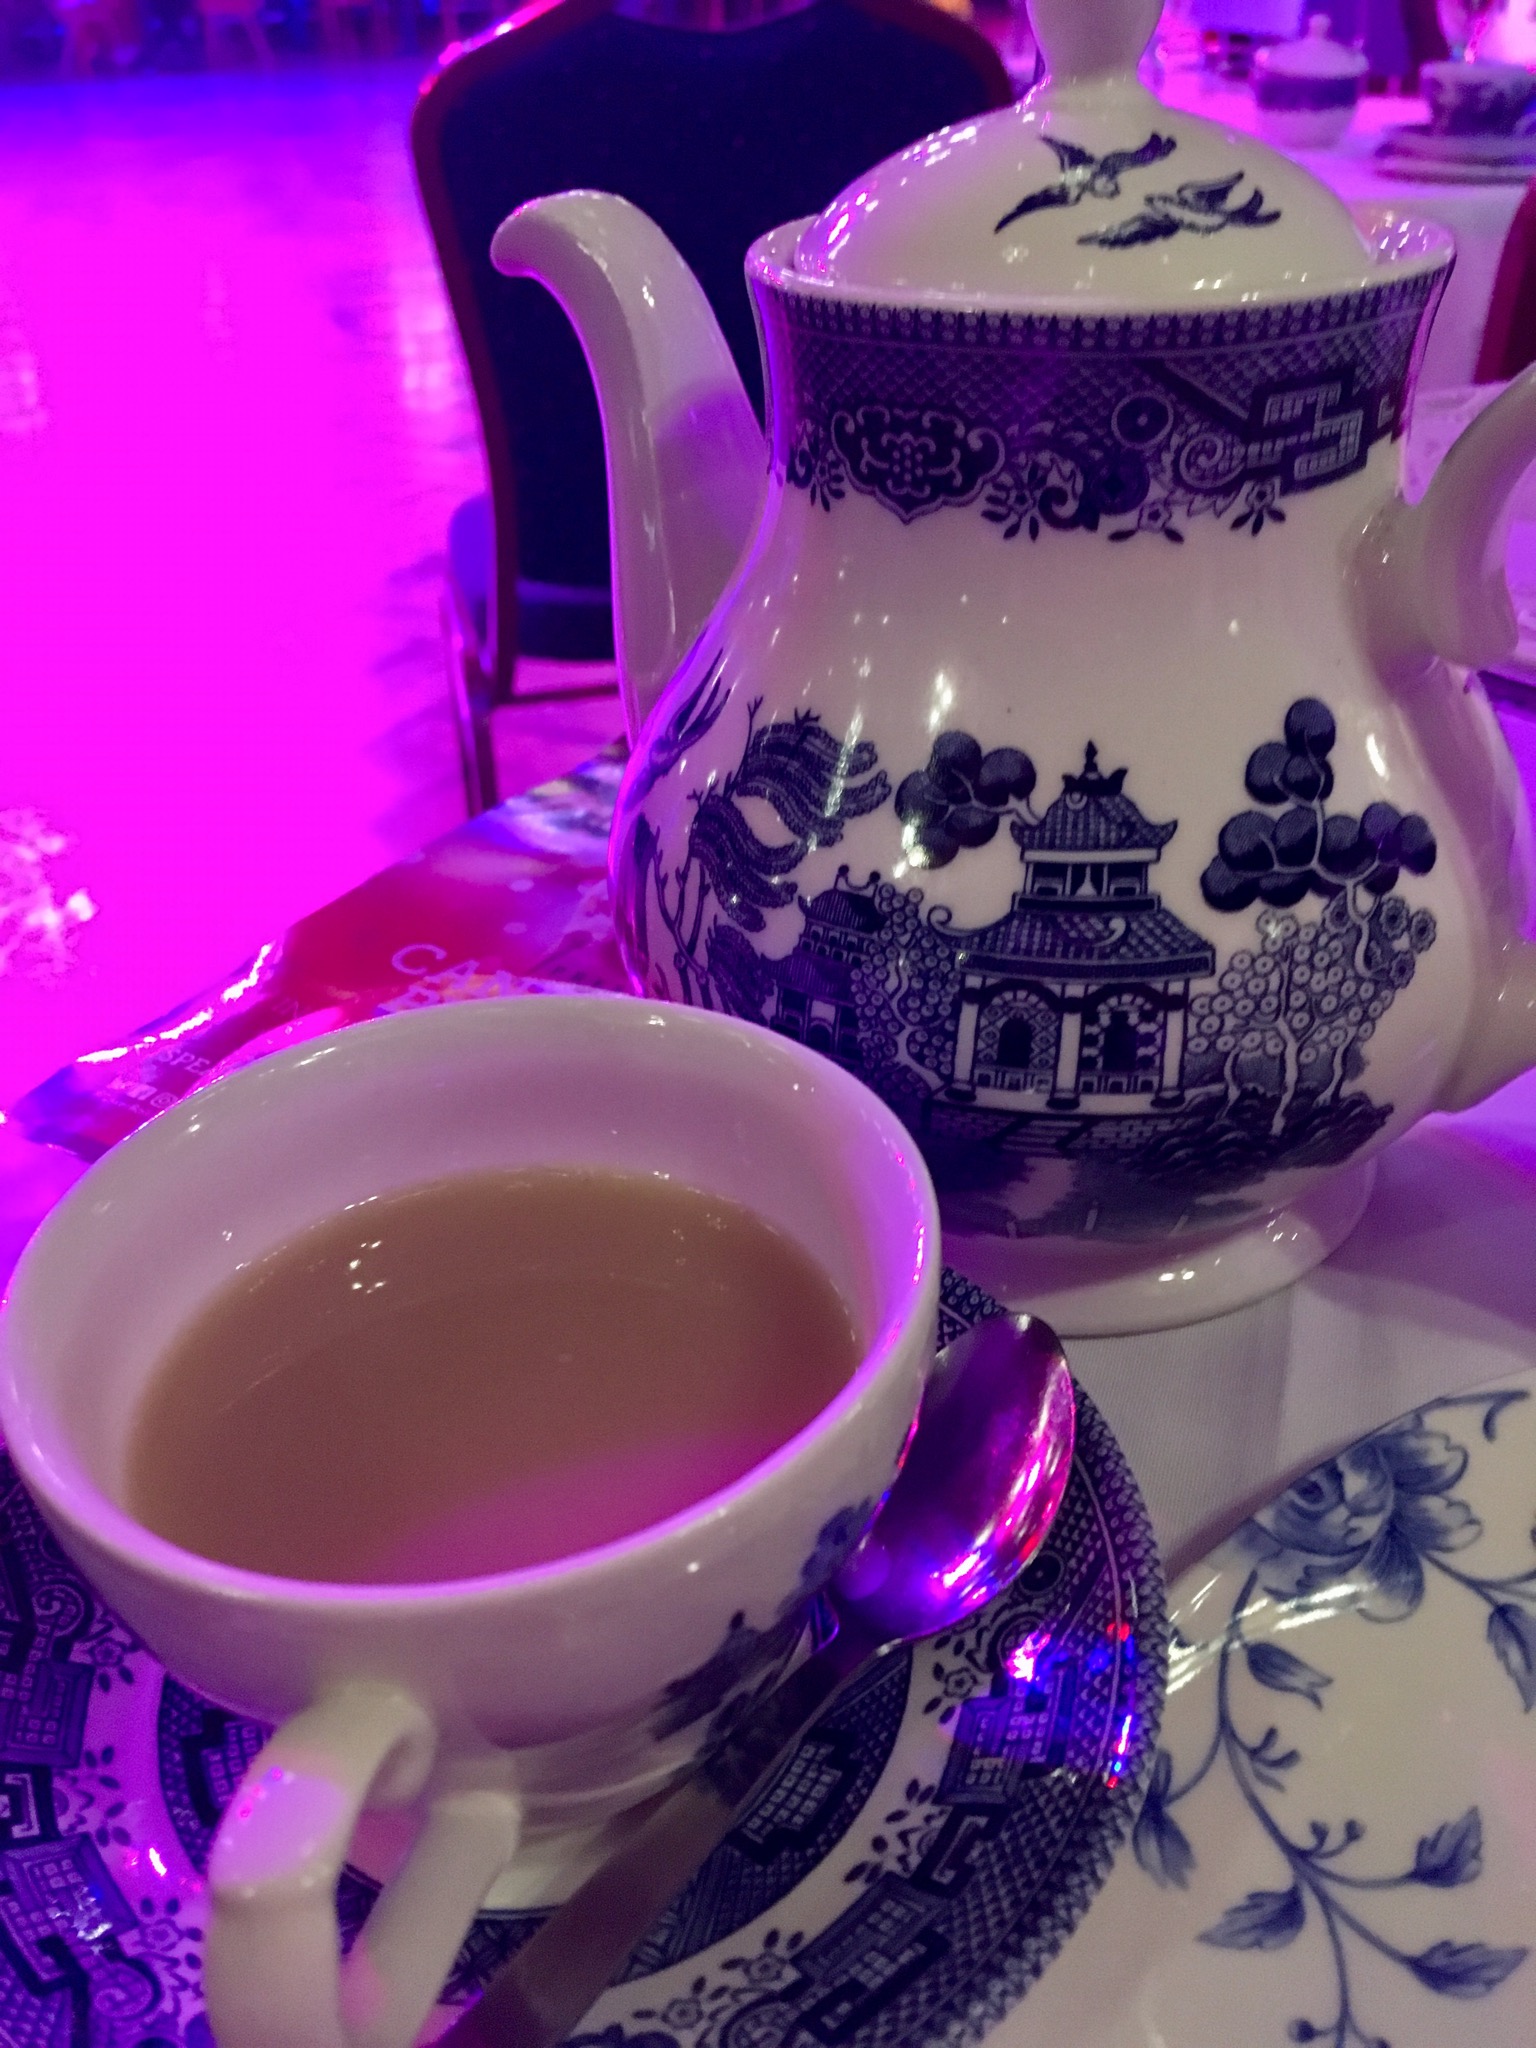 Afternoon Tea in Blackpool Tower Ballroom A tea pot and cup and saucer with tea in. The set is blue and white